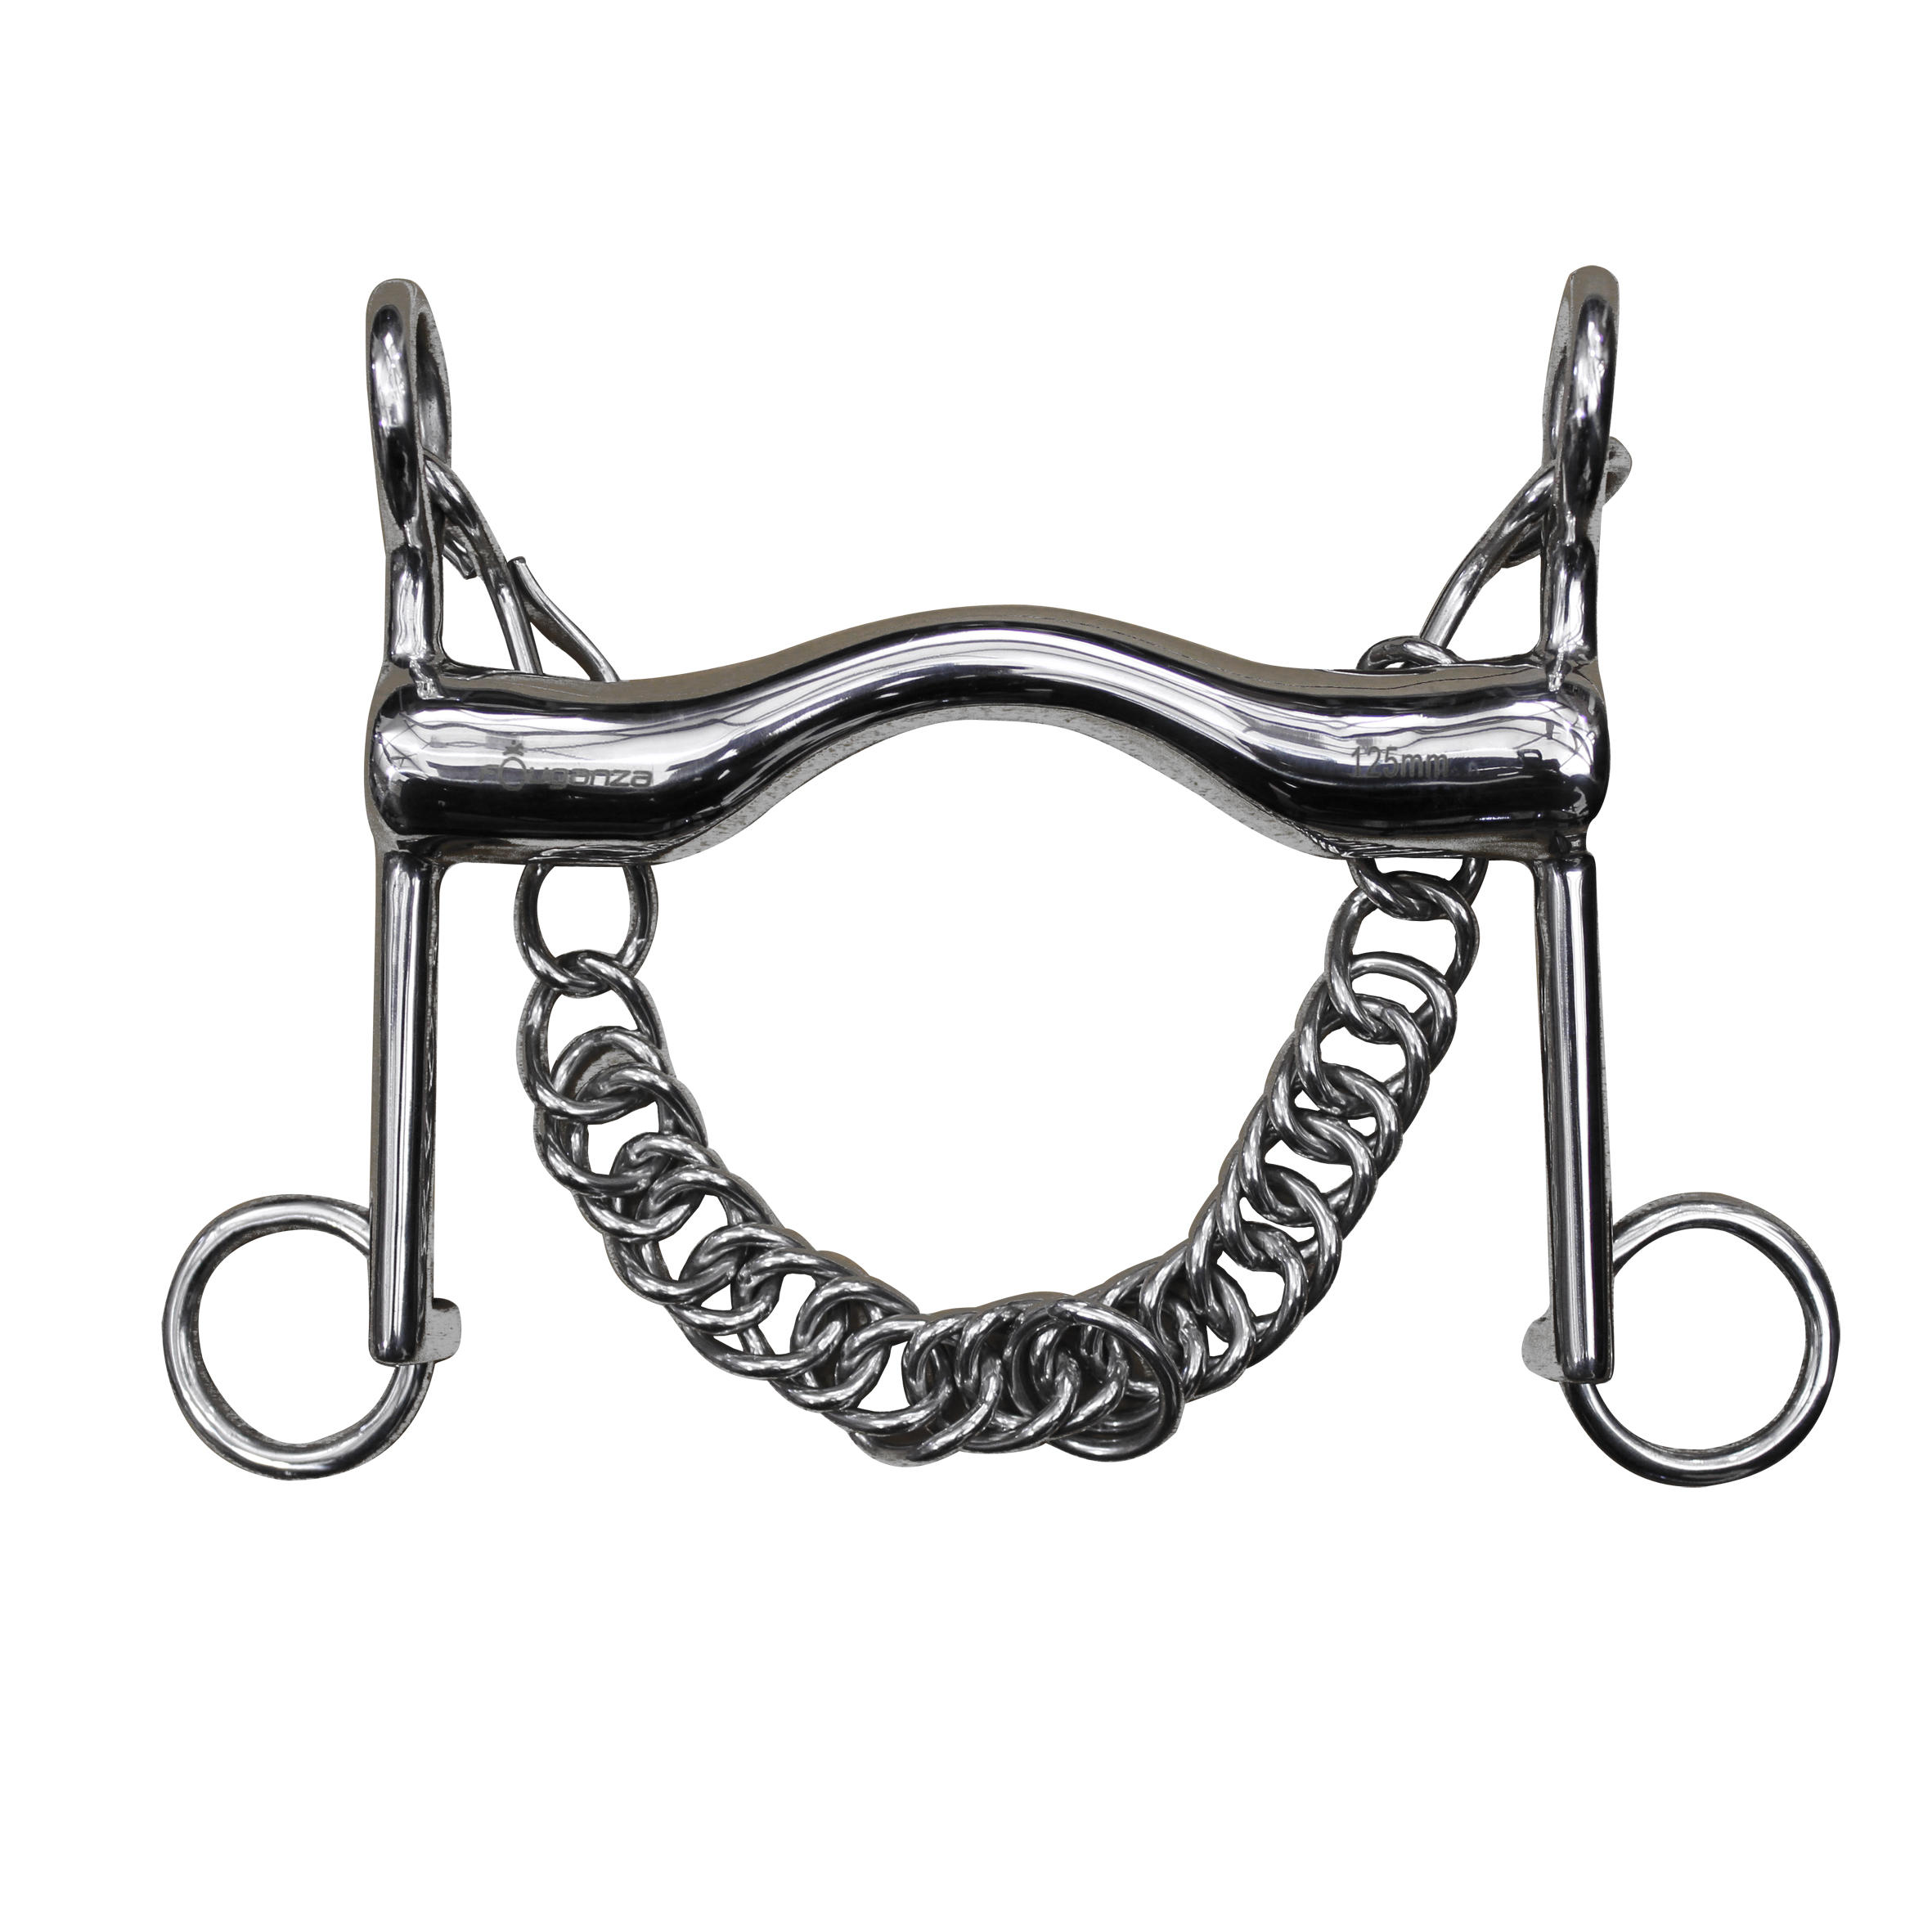 Lhotte Stainless Steel Horse Riding Bridoon Bit for Horse Or Pony 1/2